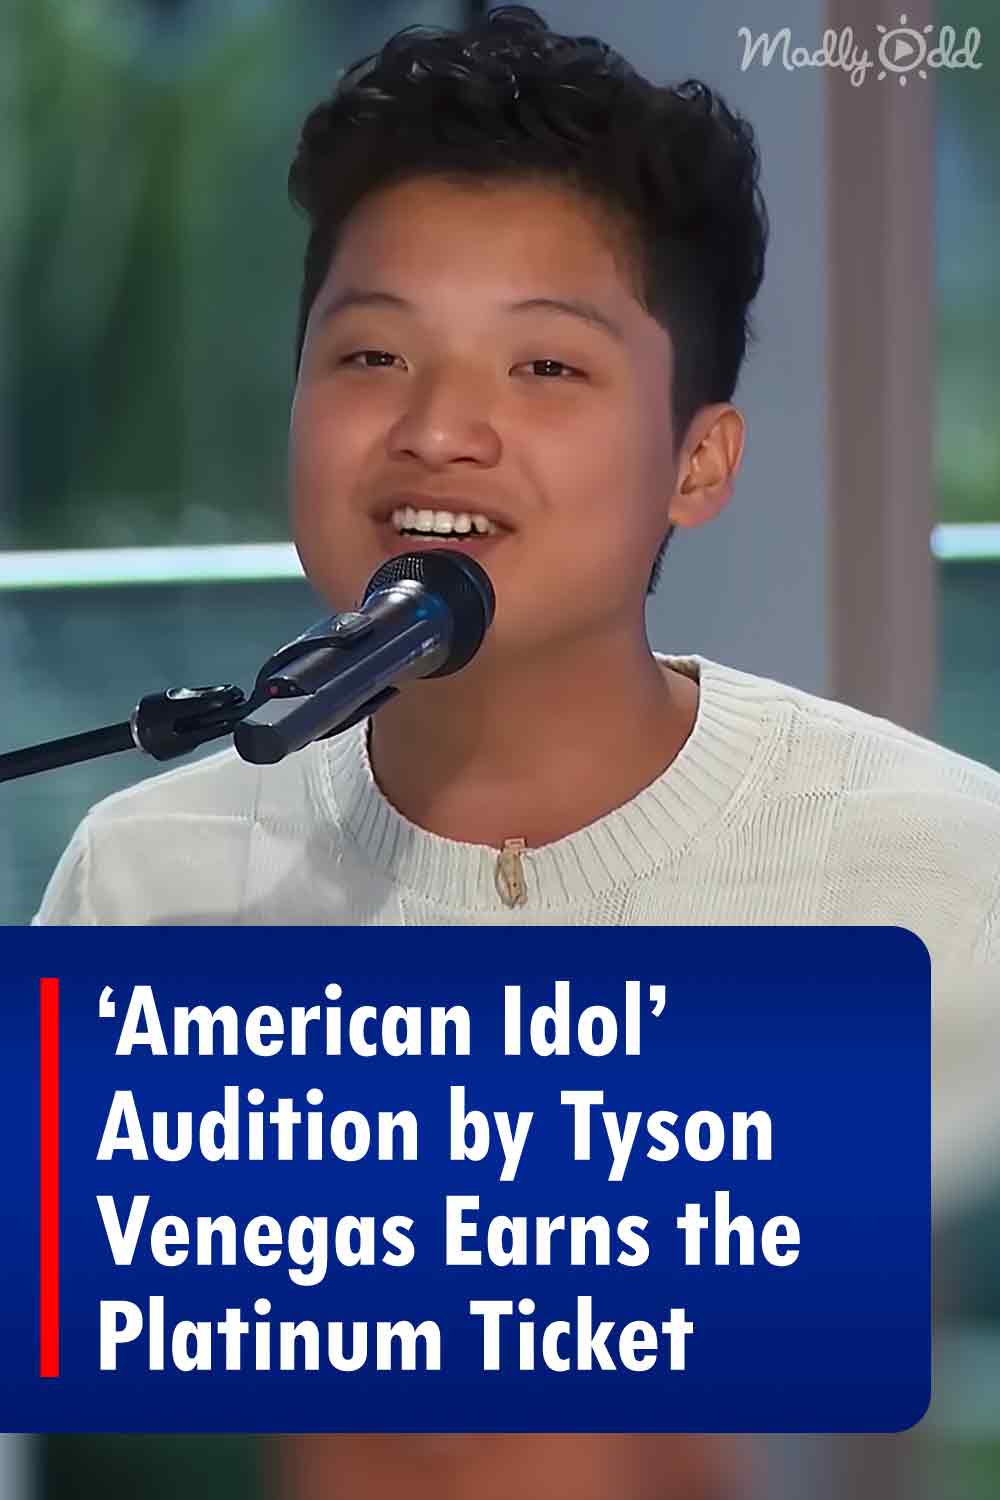 ‘American Idol’ Audition by Tyson Venegas Earns the Platinum Ticket